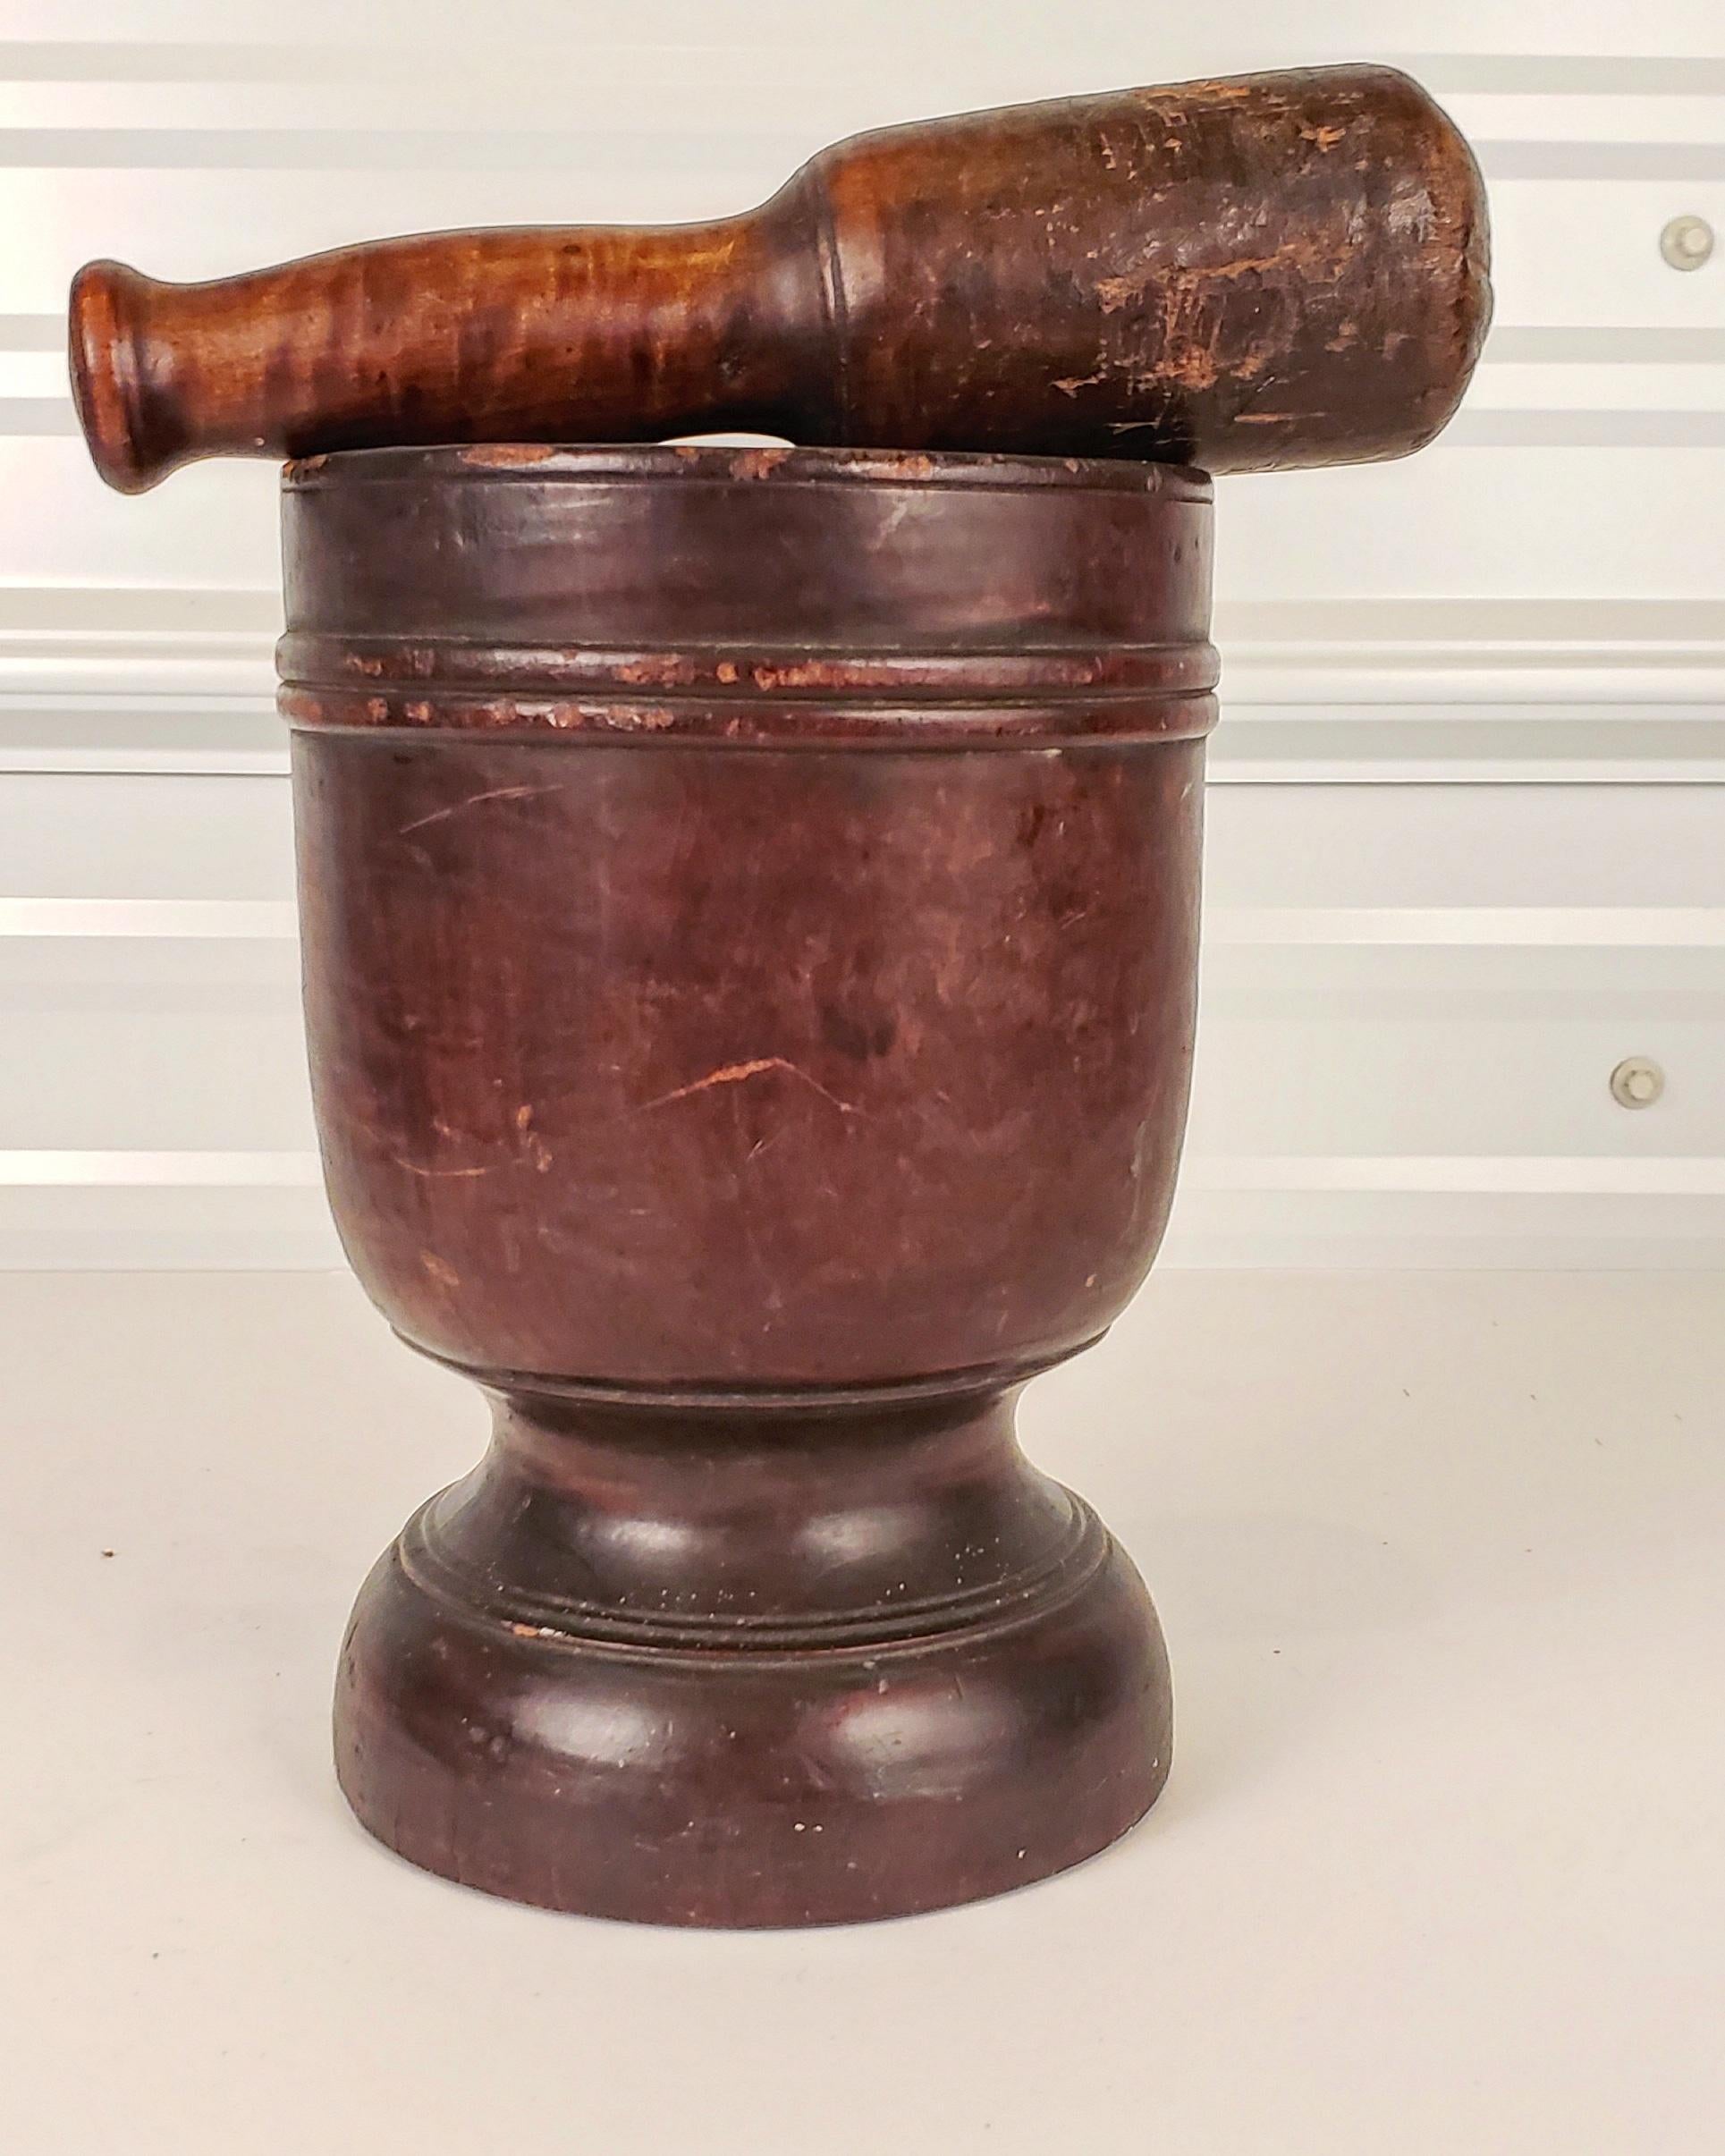 American, late 18th century/early 19th century wooden mortar and pestle. The urn shaped mortar with rich patina has a wonderful warmth and feel. The base being ergonomically correct for holding with your hand.
Albeit the pestle in figured maple